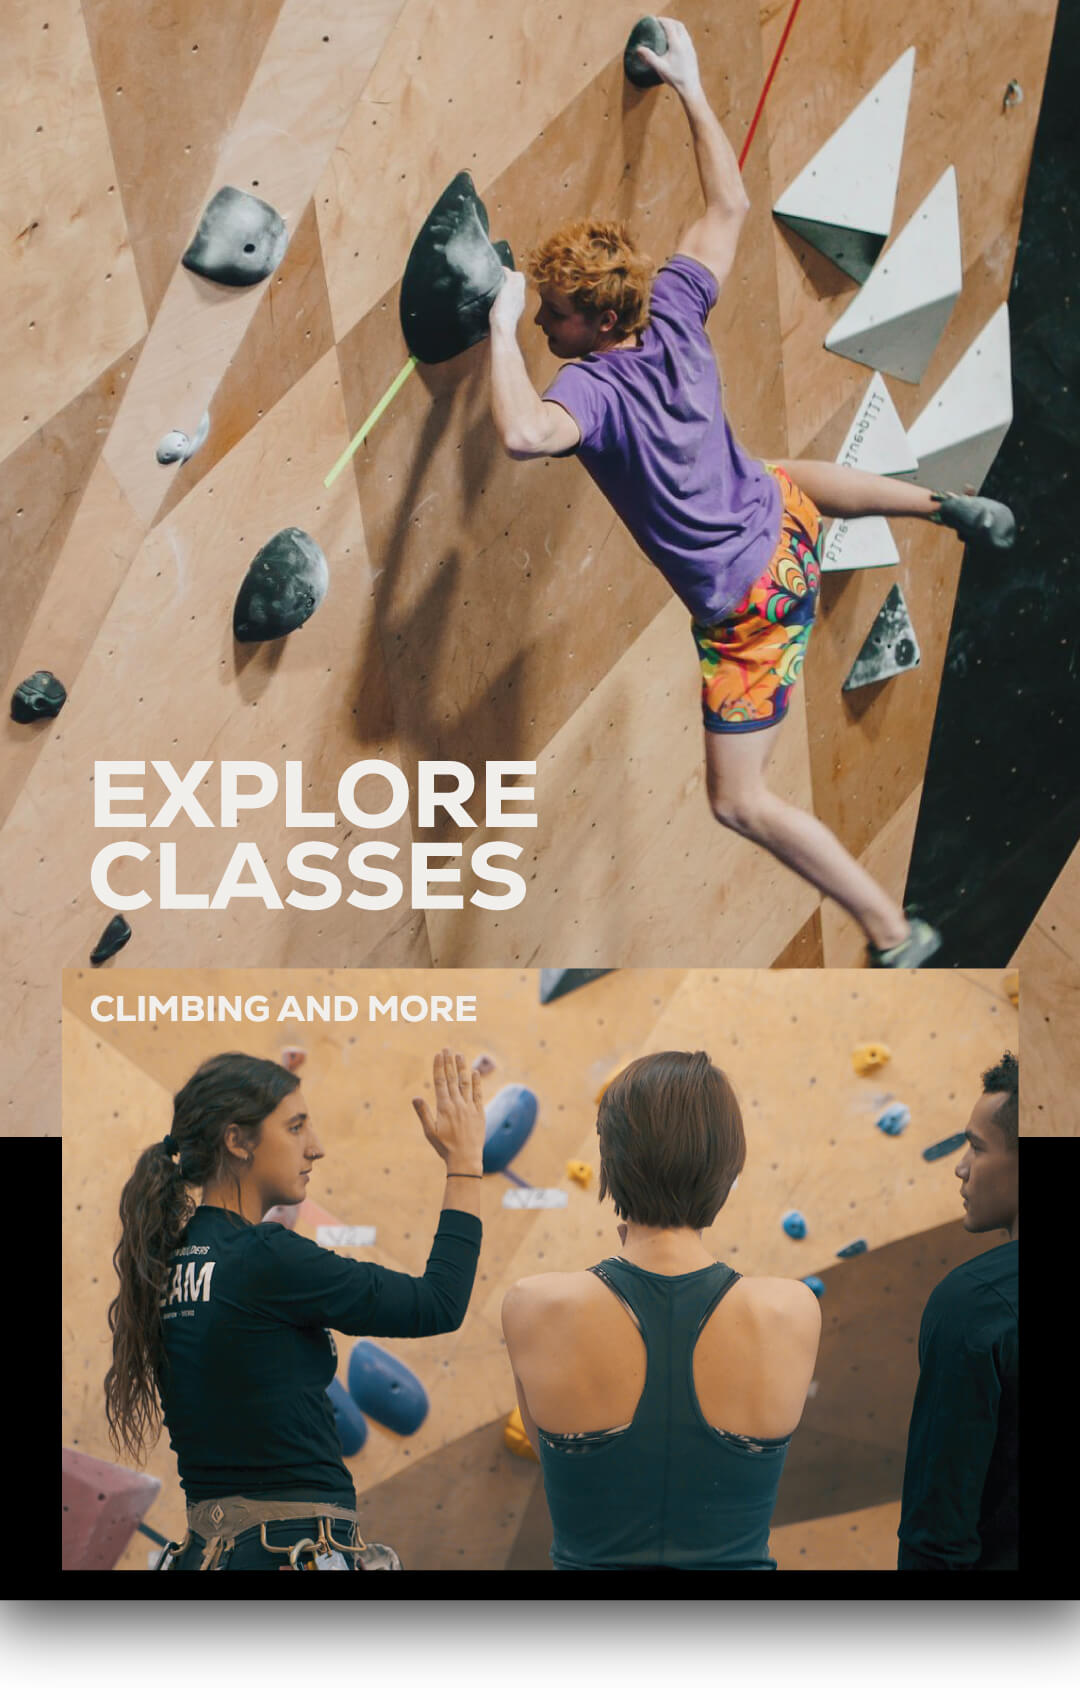 Explore classes - Man indoor rock climbing & instructor talking to two people